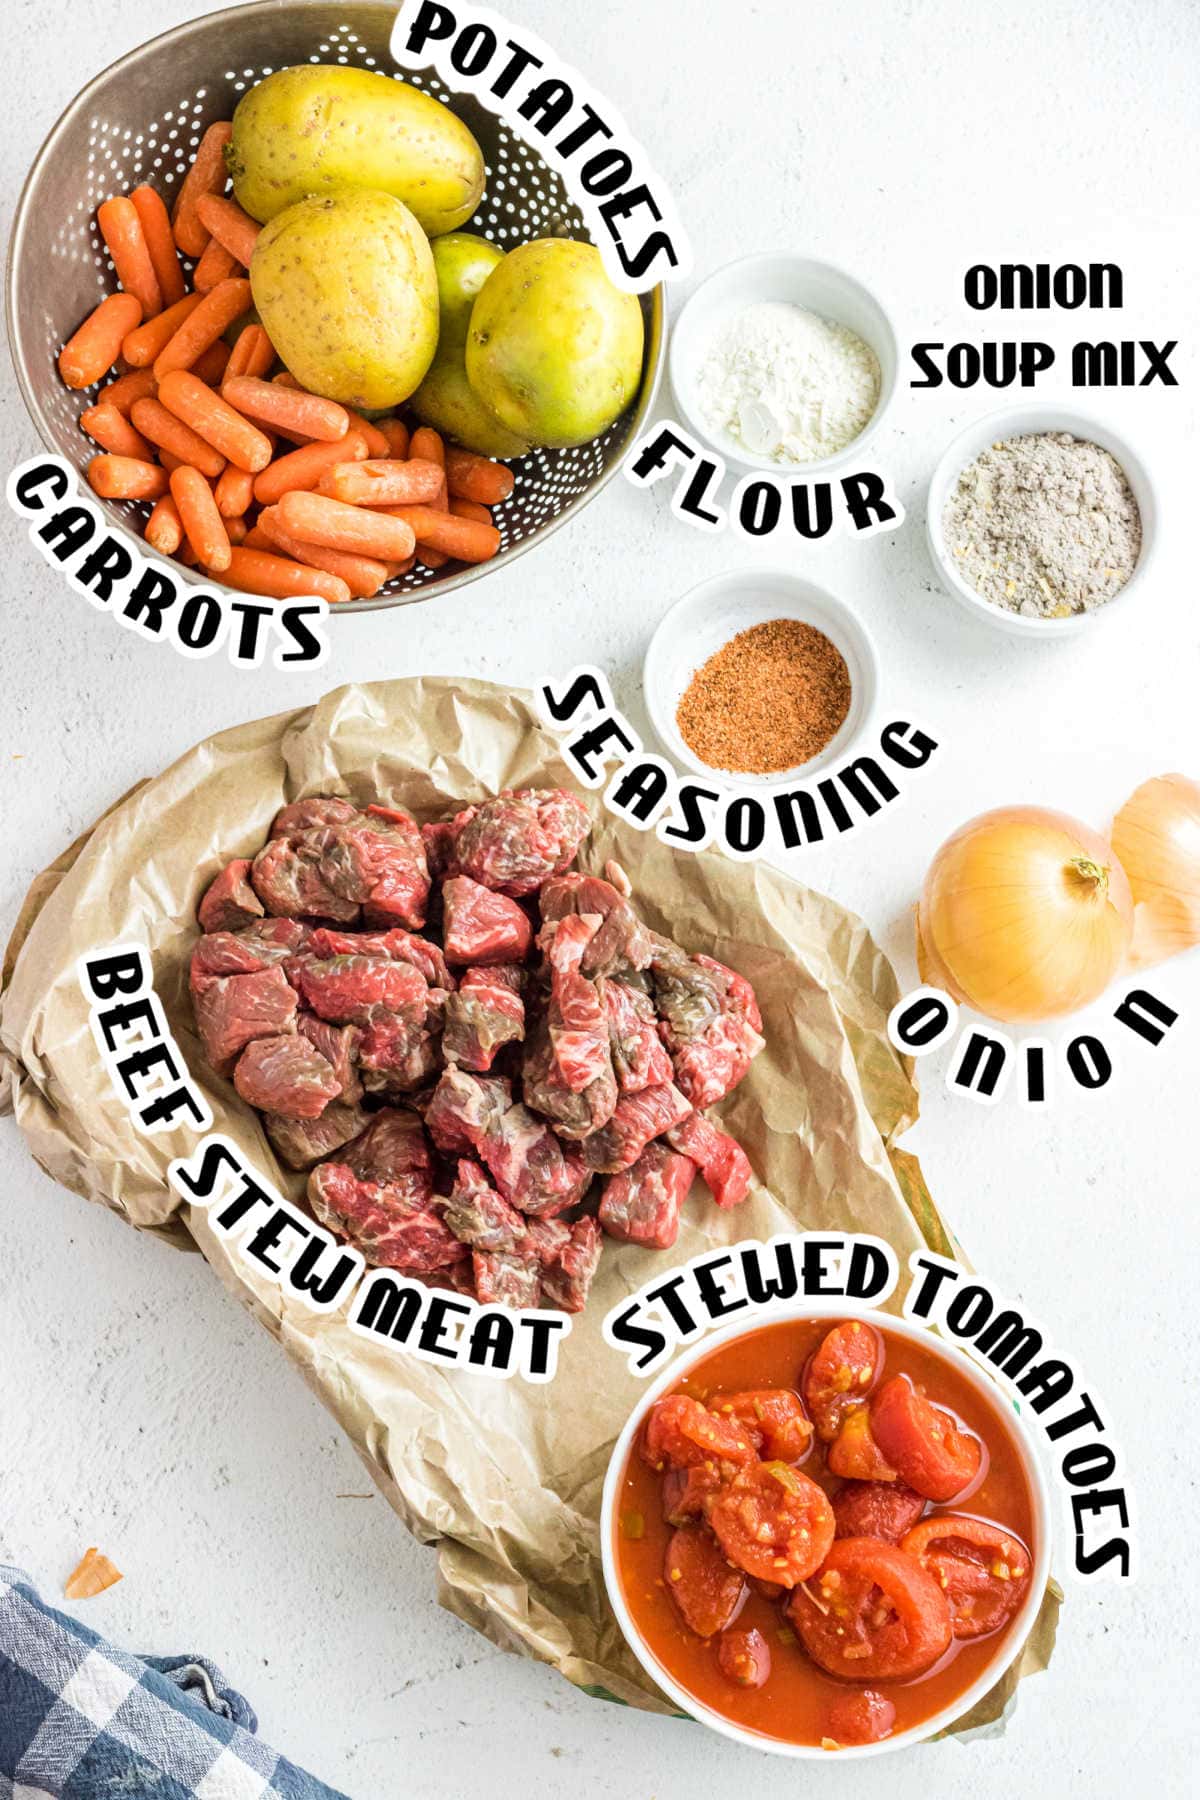 Ingredients for beef stew.